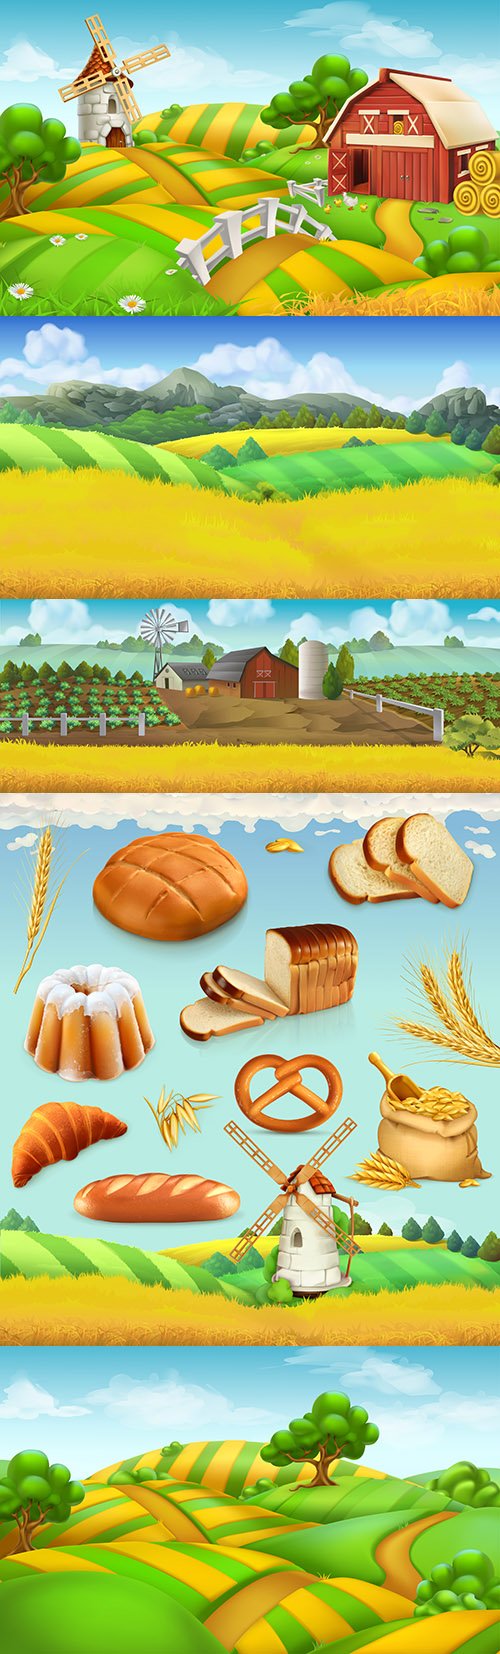 Farm field landscape and wheat with bread 3d illustrations